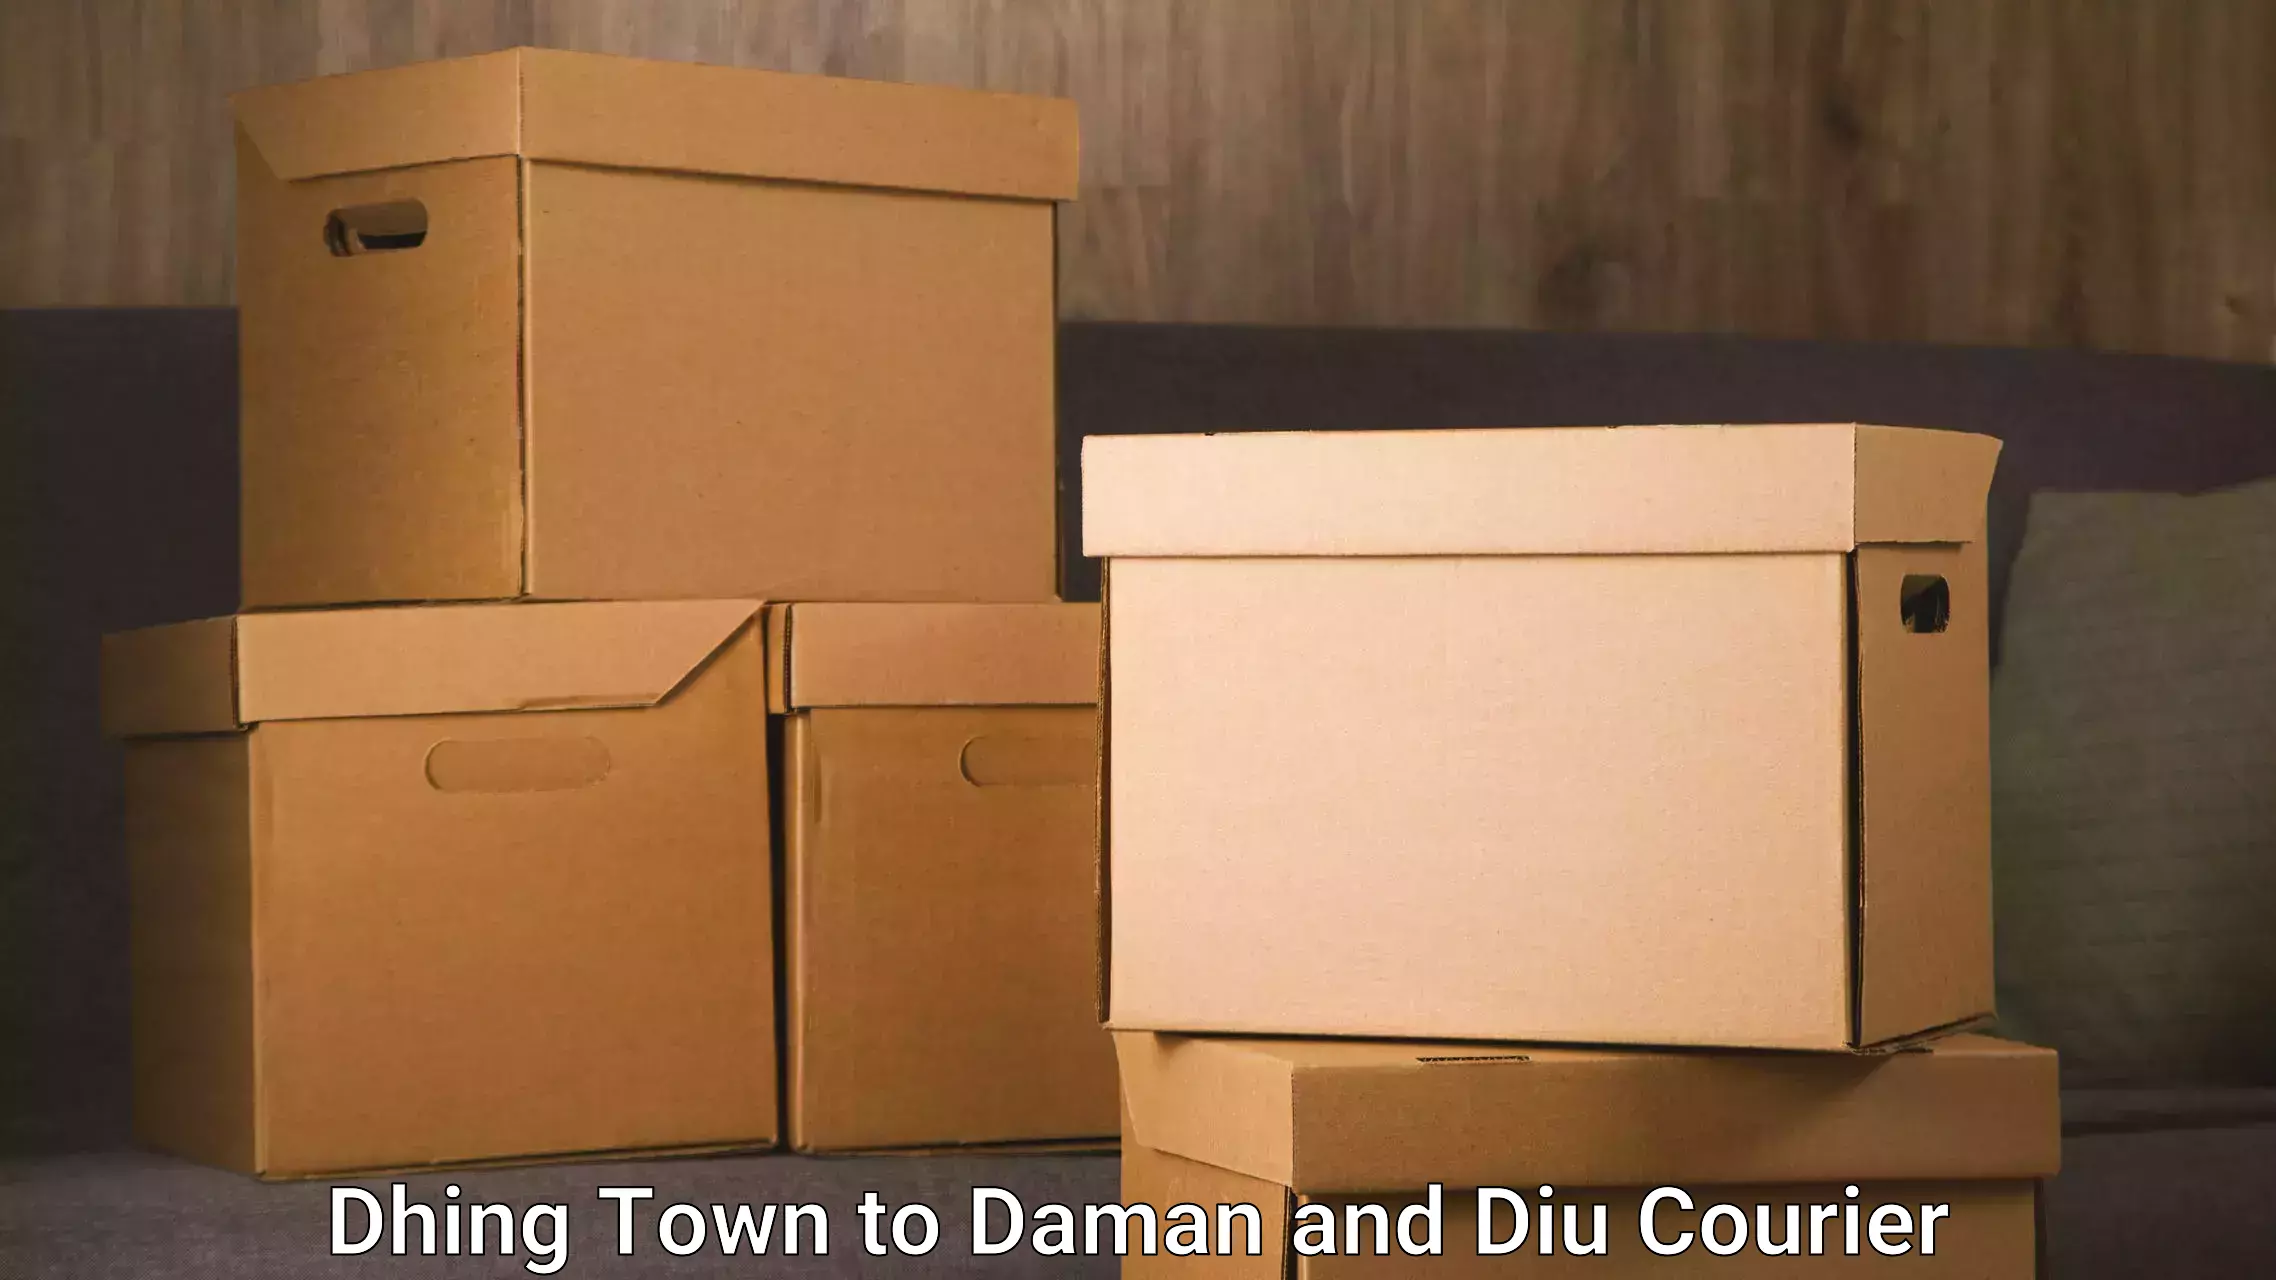 Overnight delivery services Dhing Town to Daman and Diu